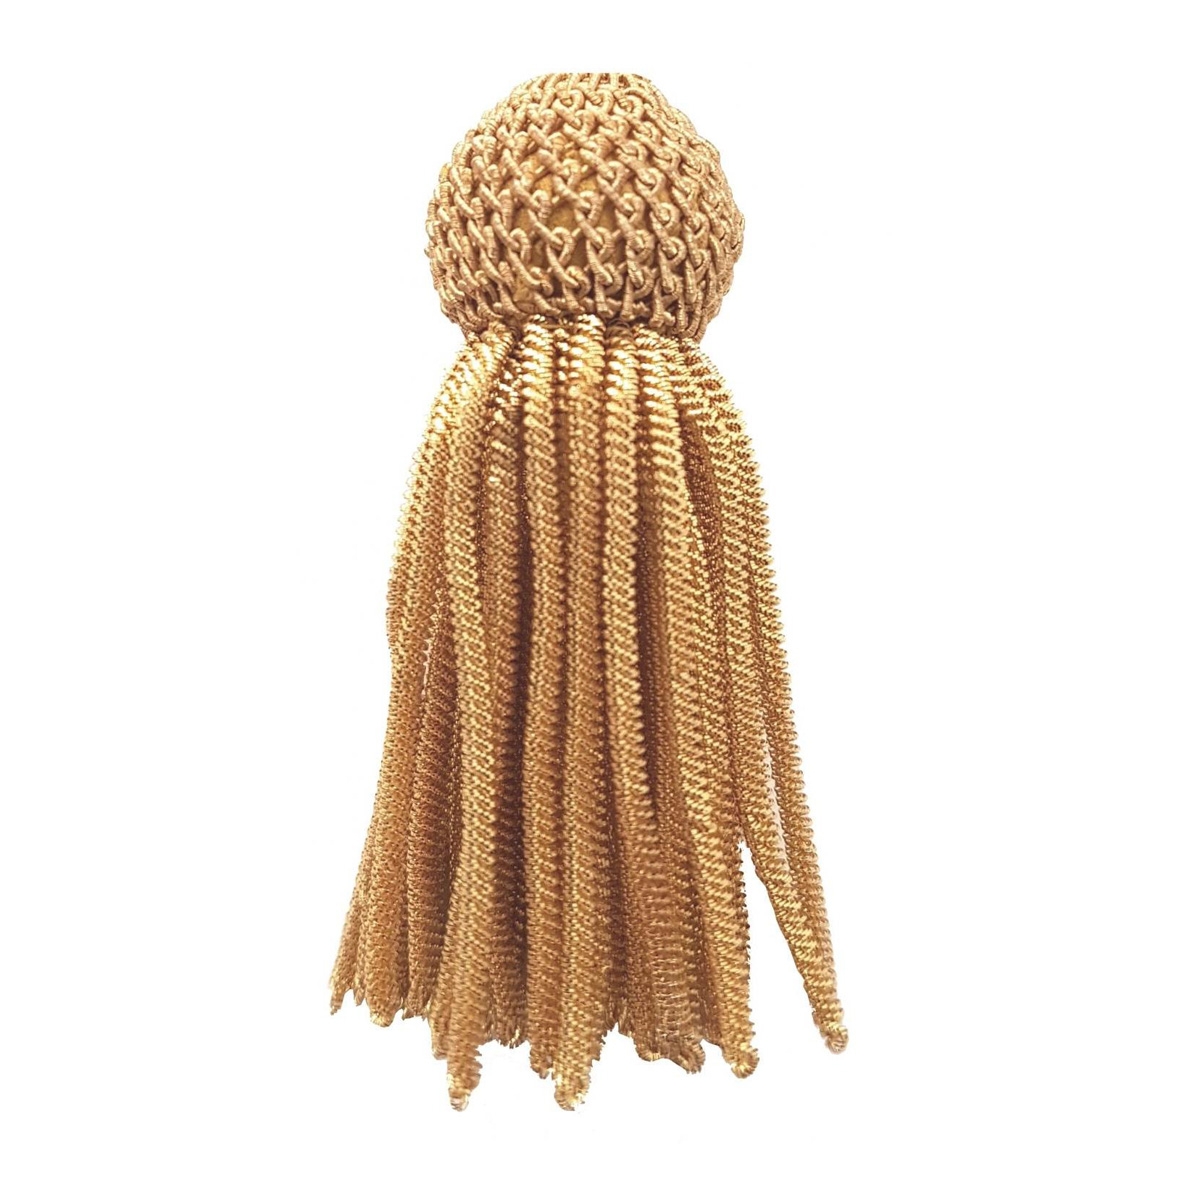 Gold pompon - One big ball with small fringes - The unit tassel high quality  Bullion Tassel 